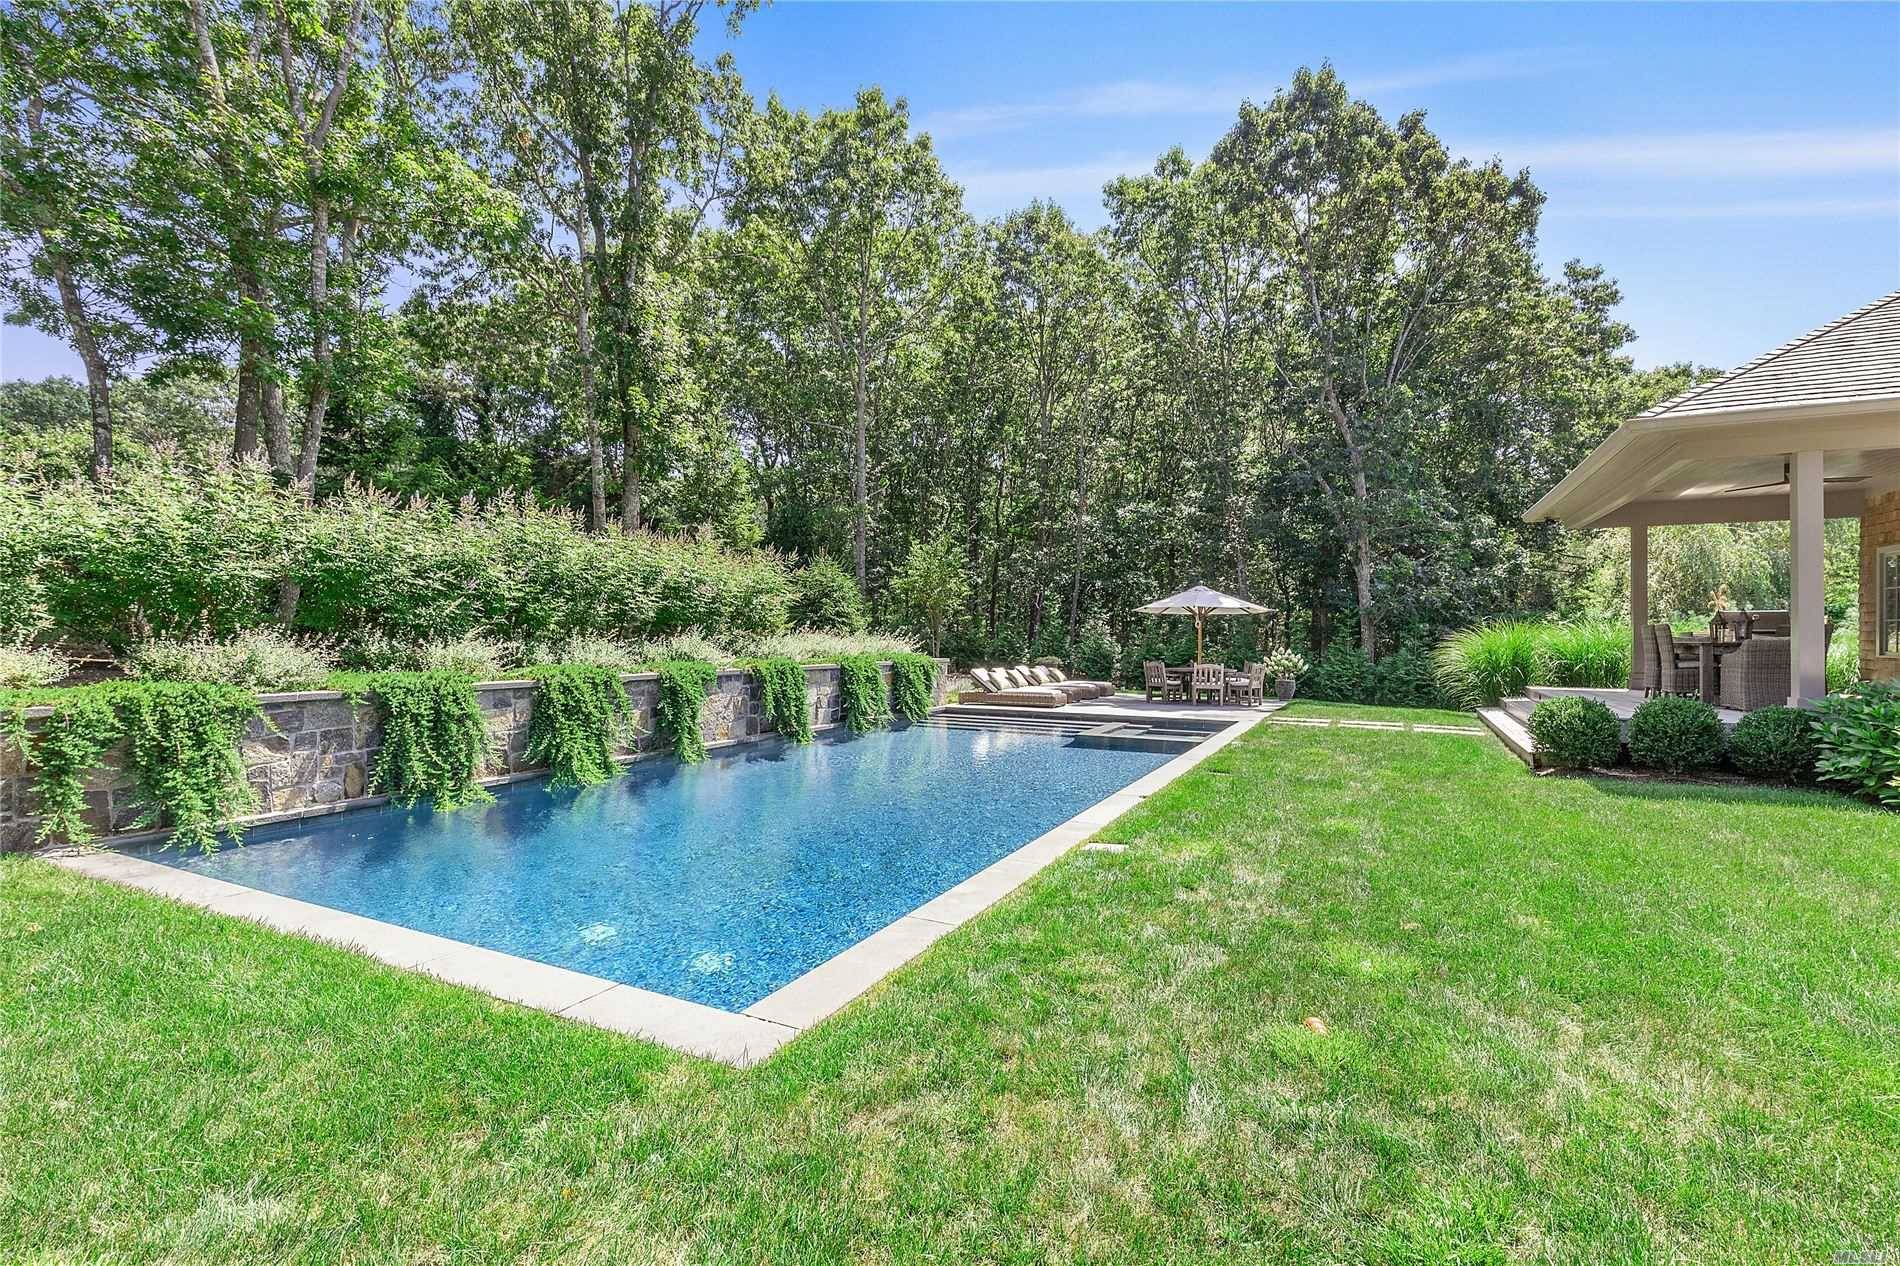 Custom built, top of the line amenities, private stone driveway.